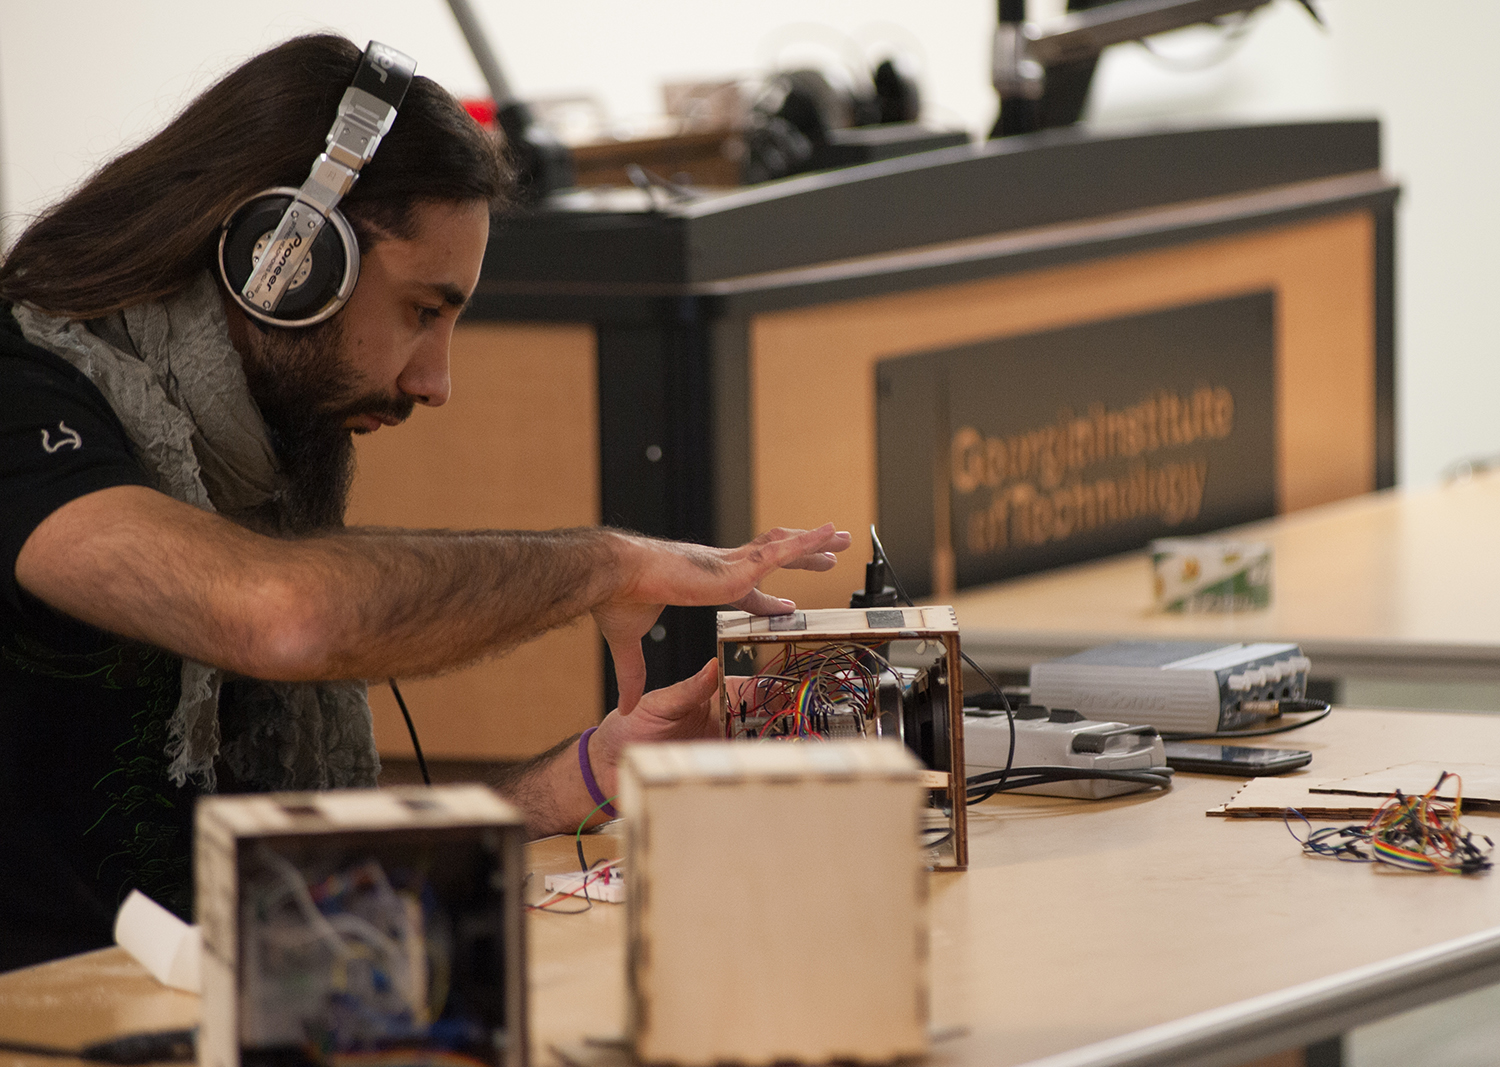 Man wearing headphones pressing a button on a small wooden box